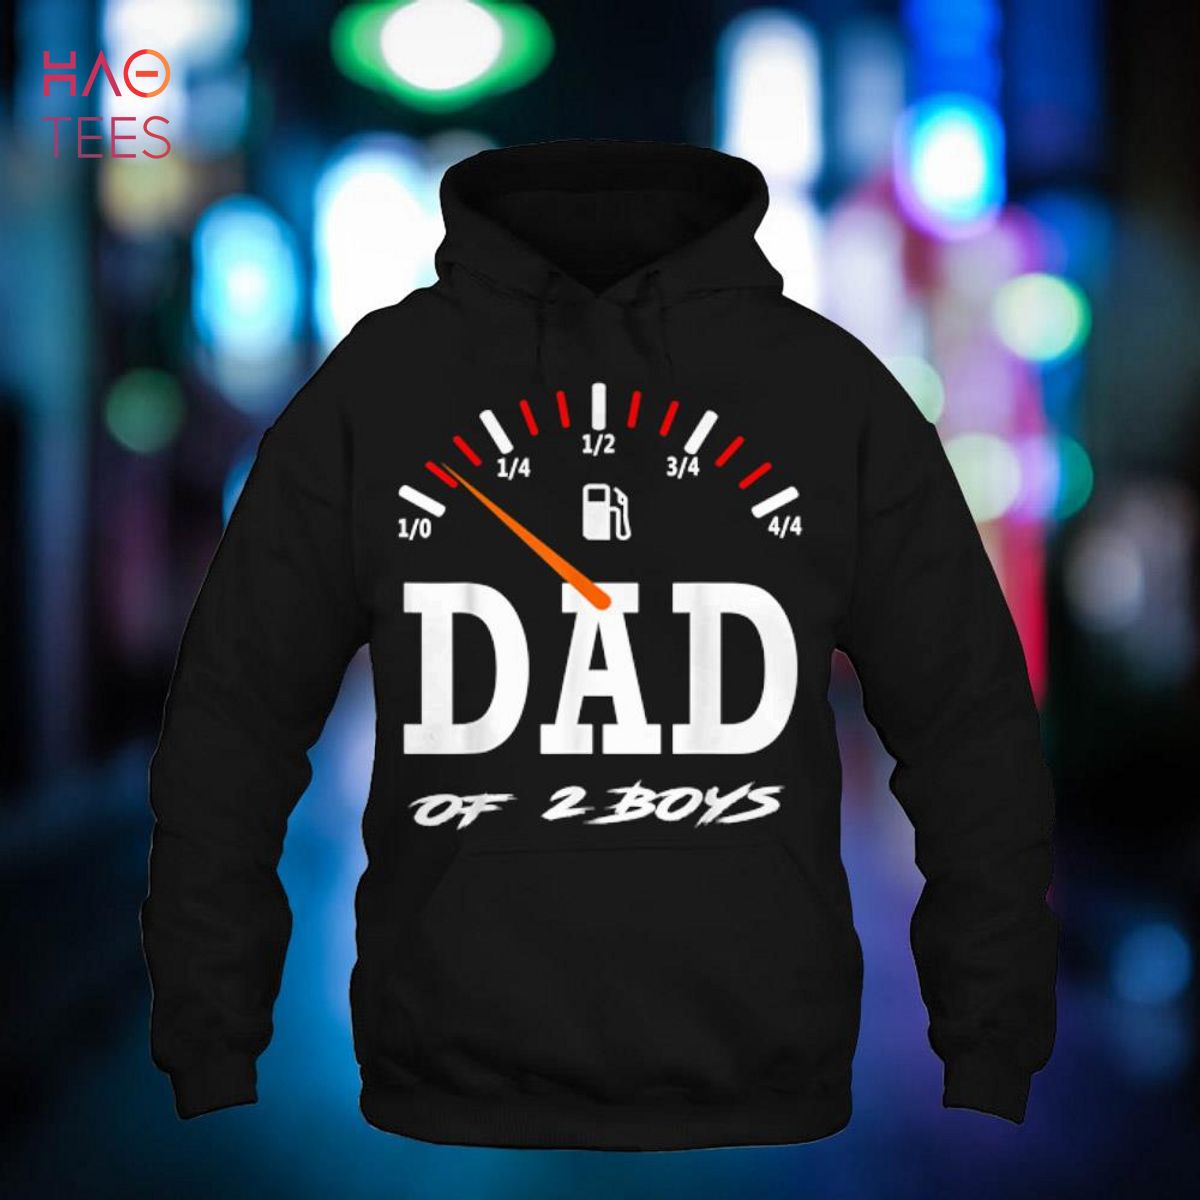 FUNNY Mens DAD of 2 Boys, father or grandpa of 2 kids Shirt